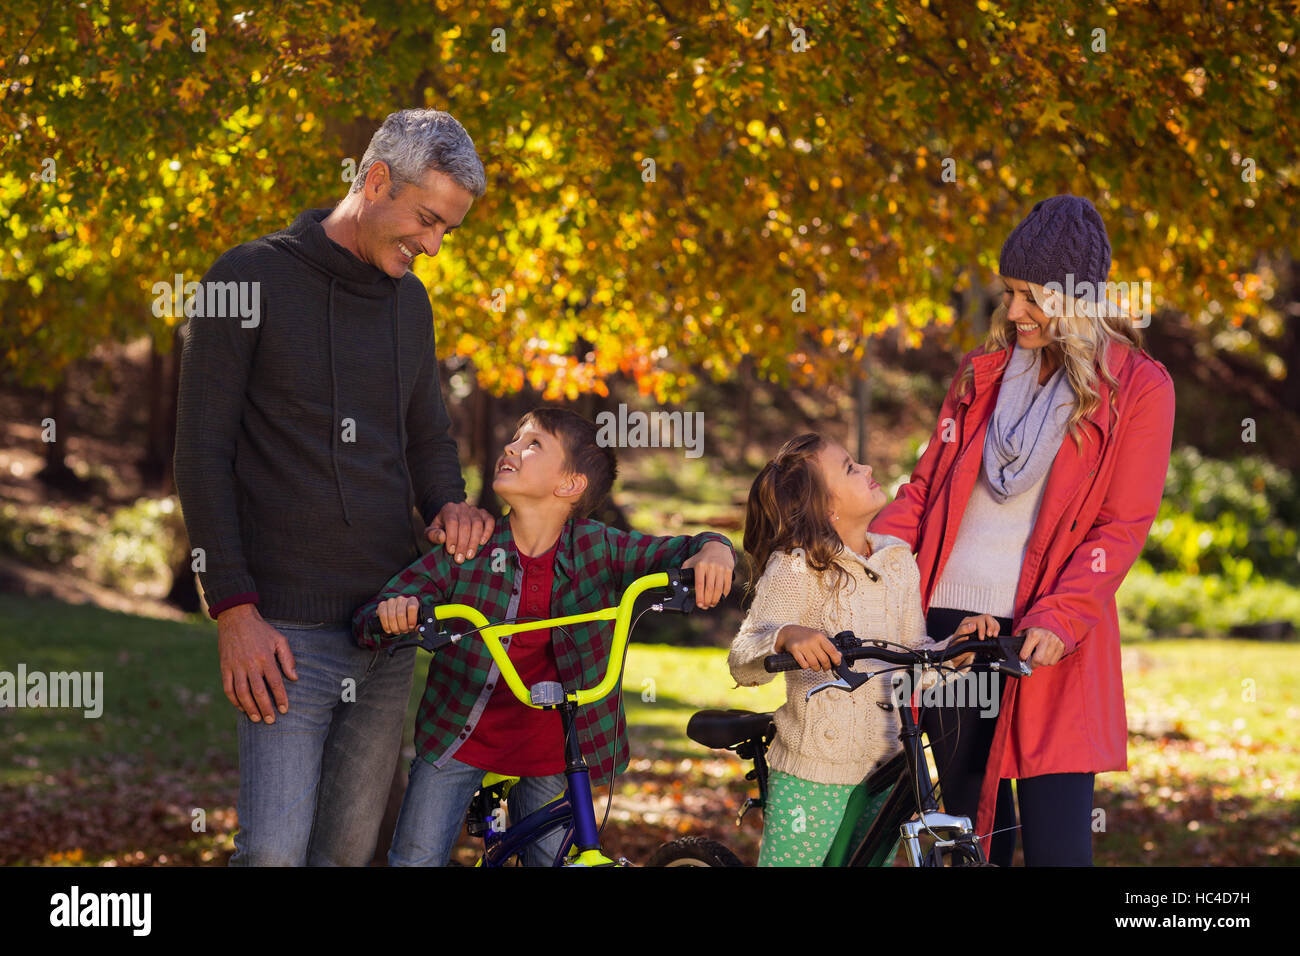 Happy children riding bicycles with parents Stock Photo